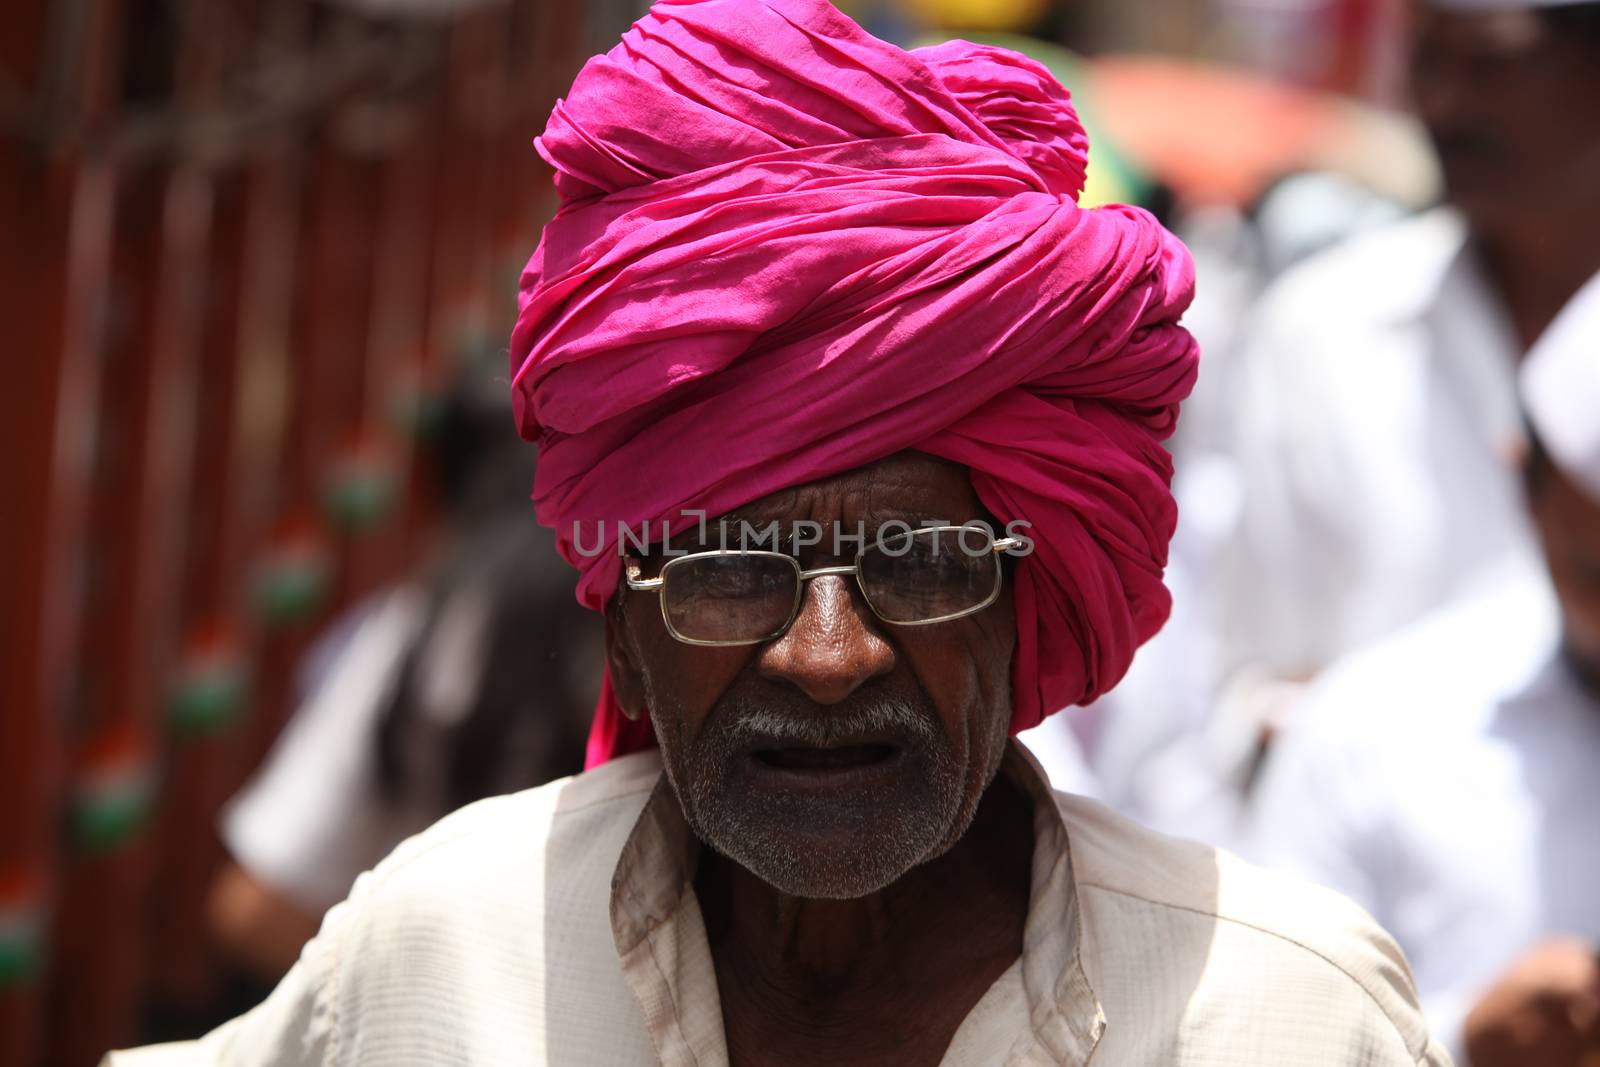 Pune, India - July 11, 2015: An old Indian pilgrim with a tradit by thefinalmiracle